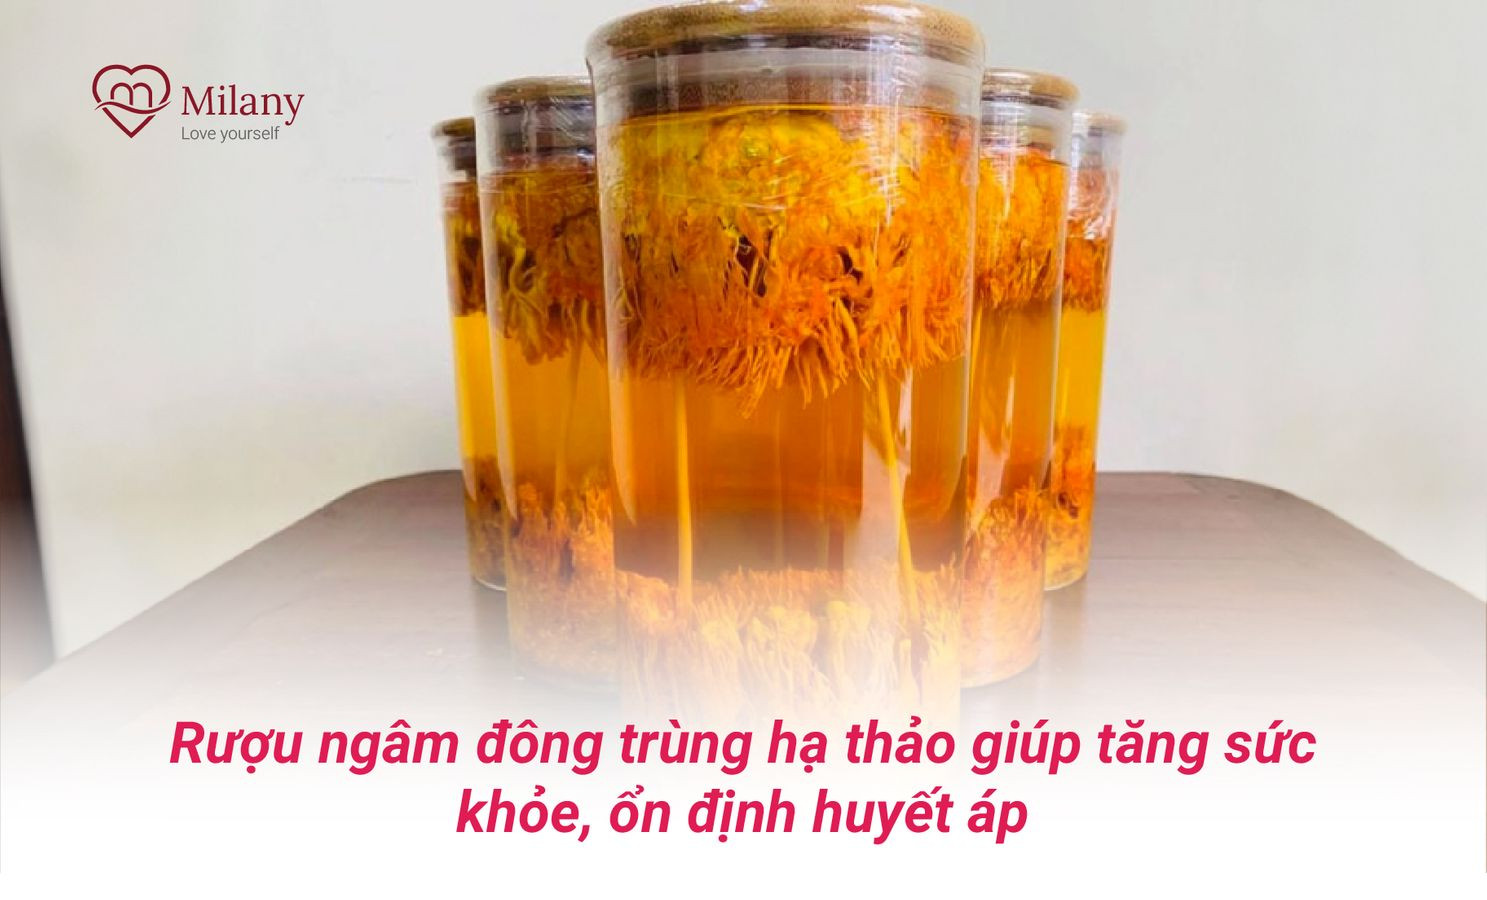 ruou ngam dong trung ha thao